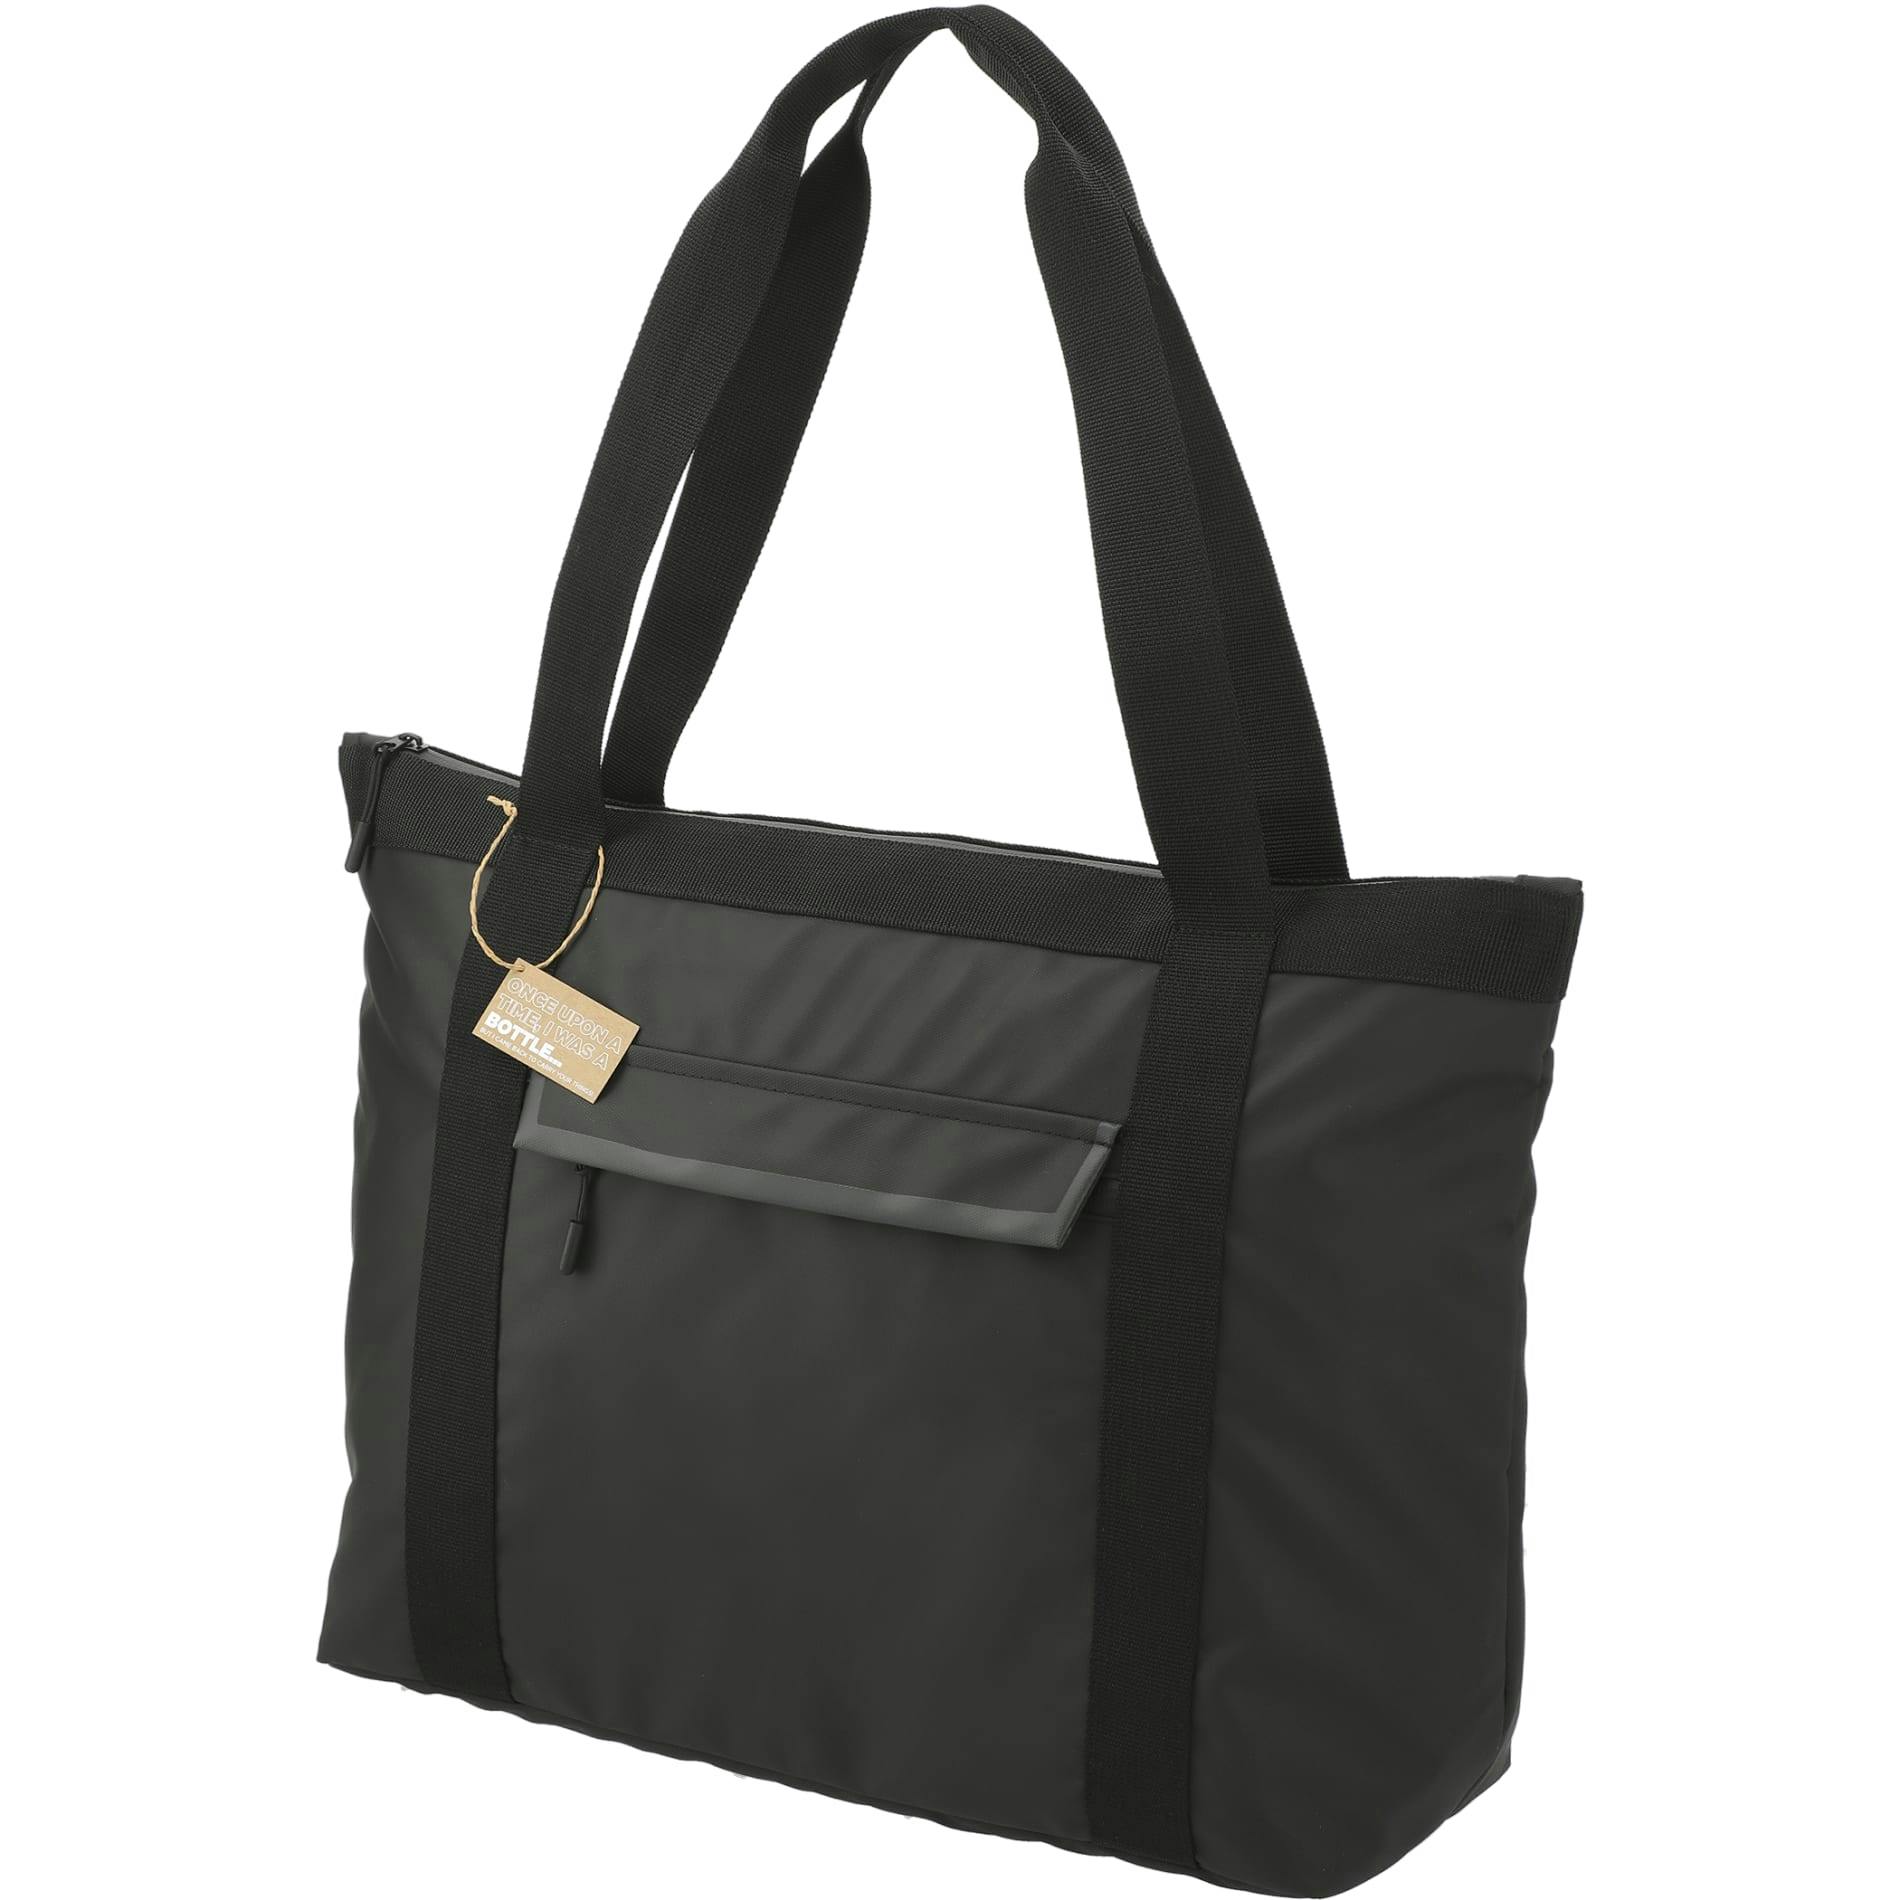 NBN All-Weather Recycled Tote - additional Image 1